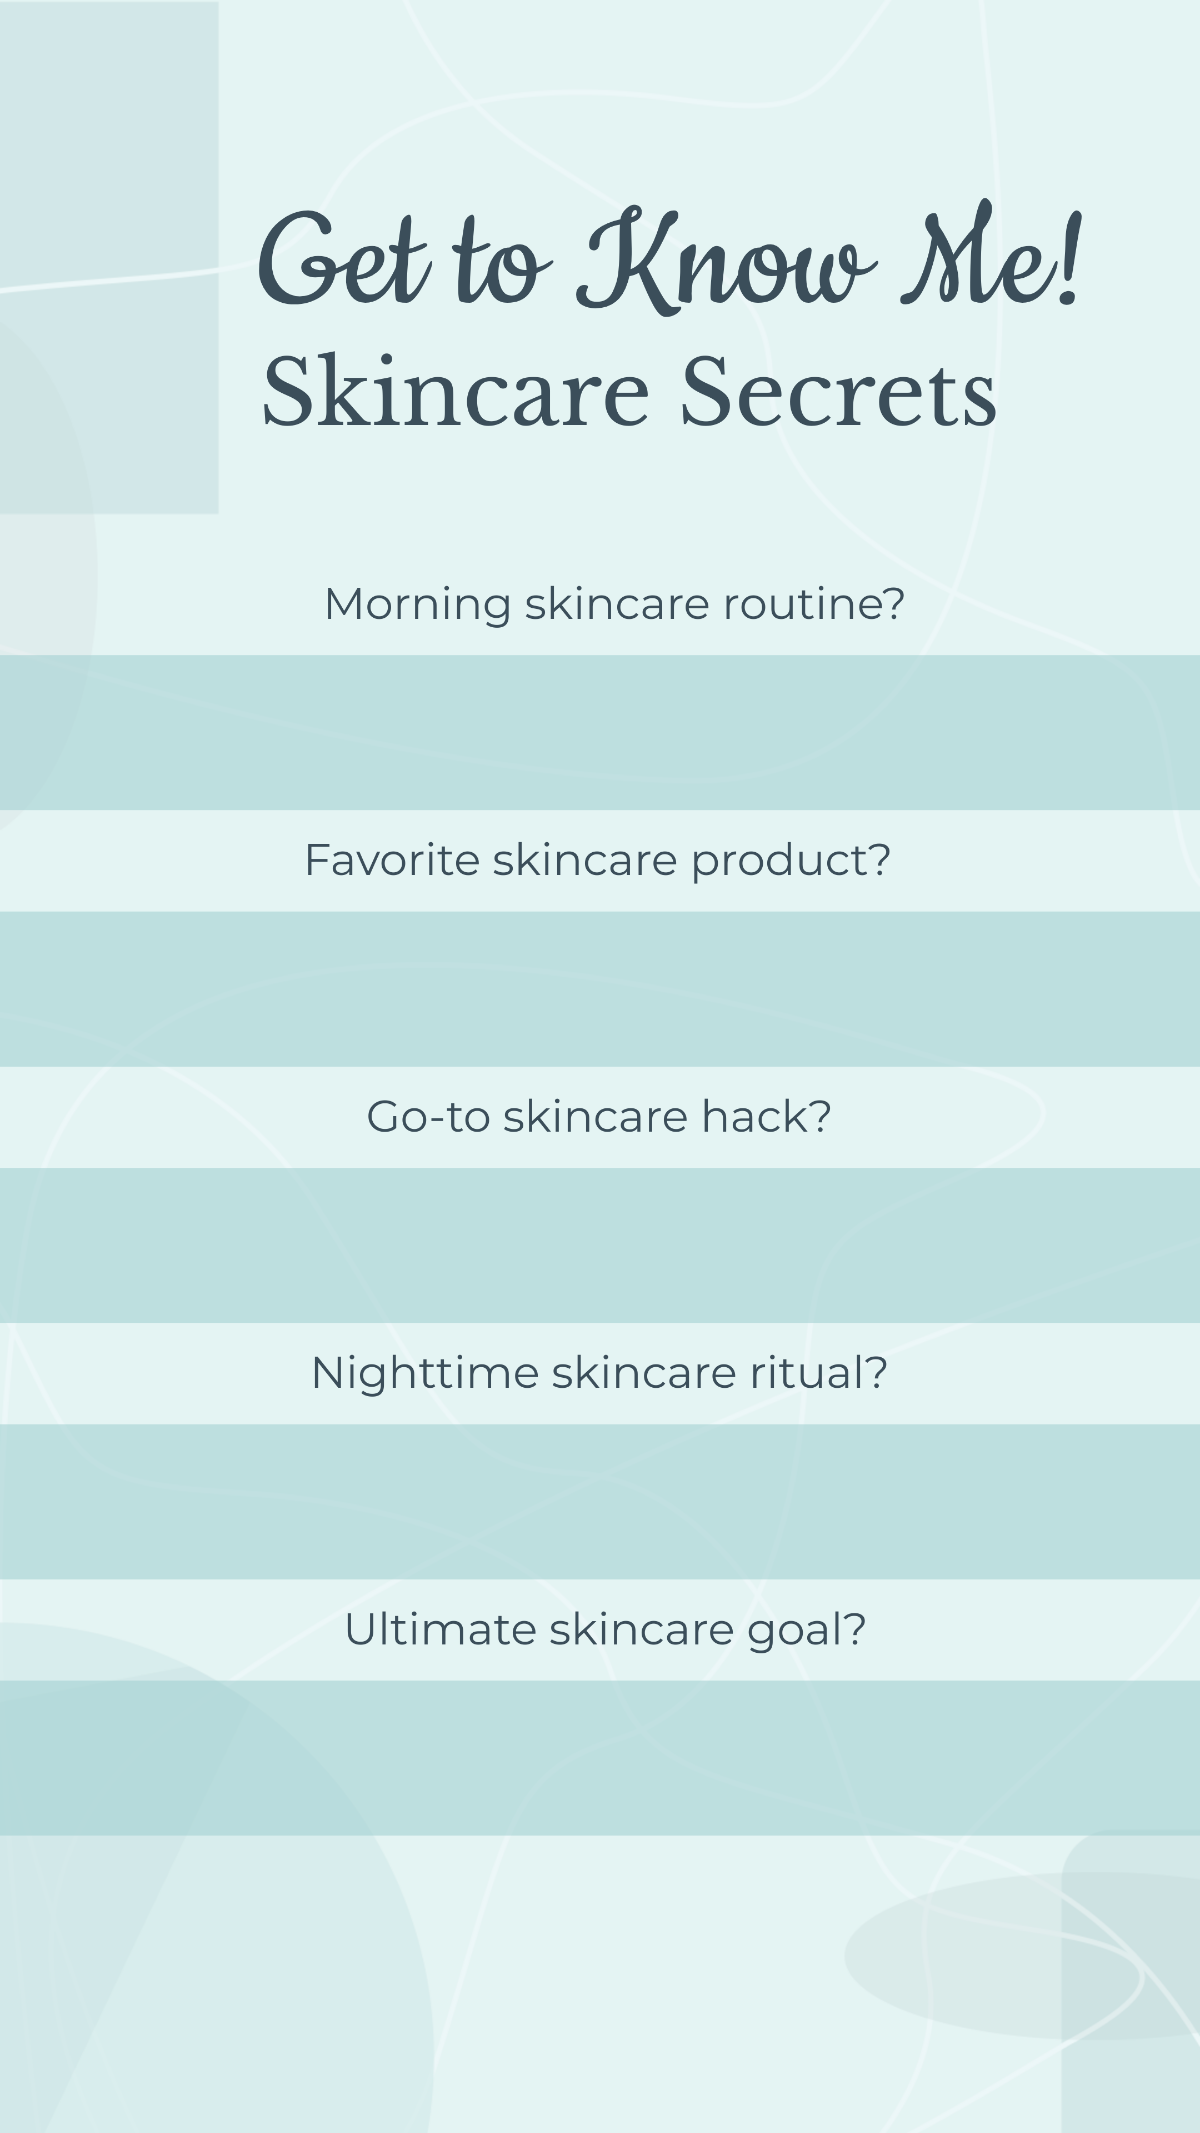 Get to Know Me Skincare Questionnaire Facebook Post